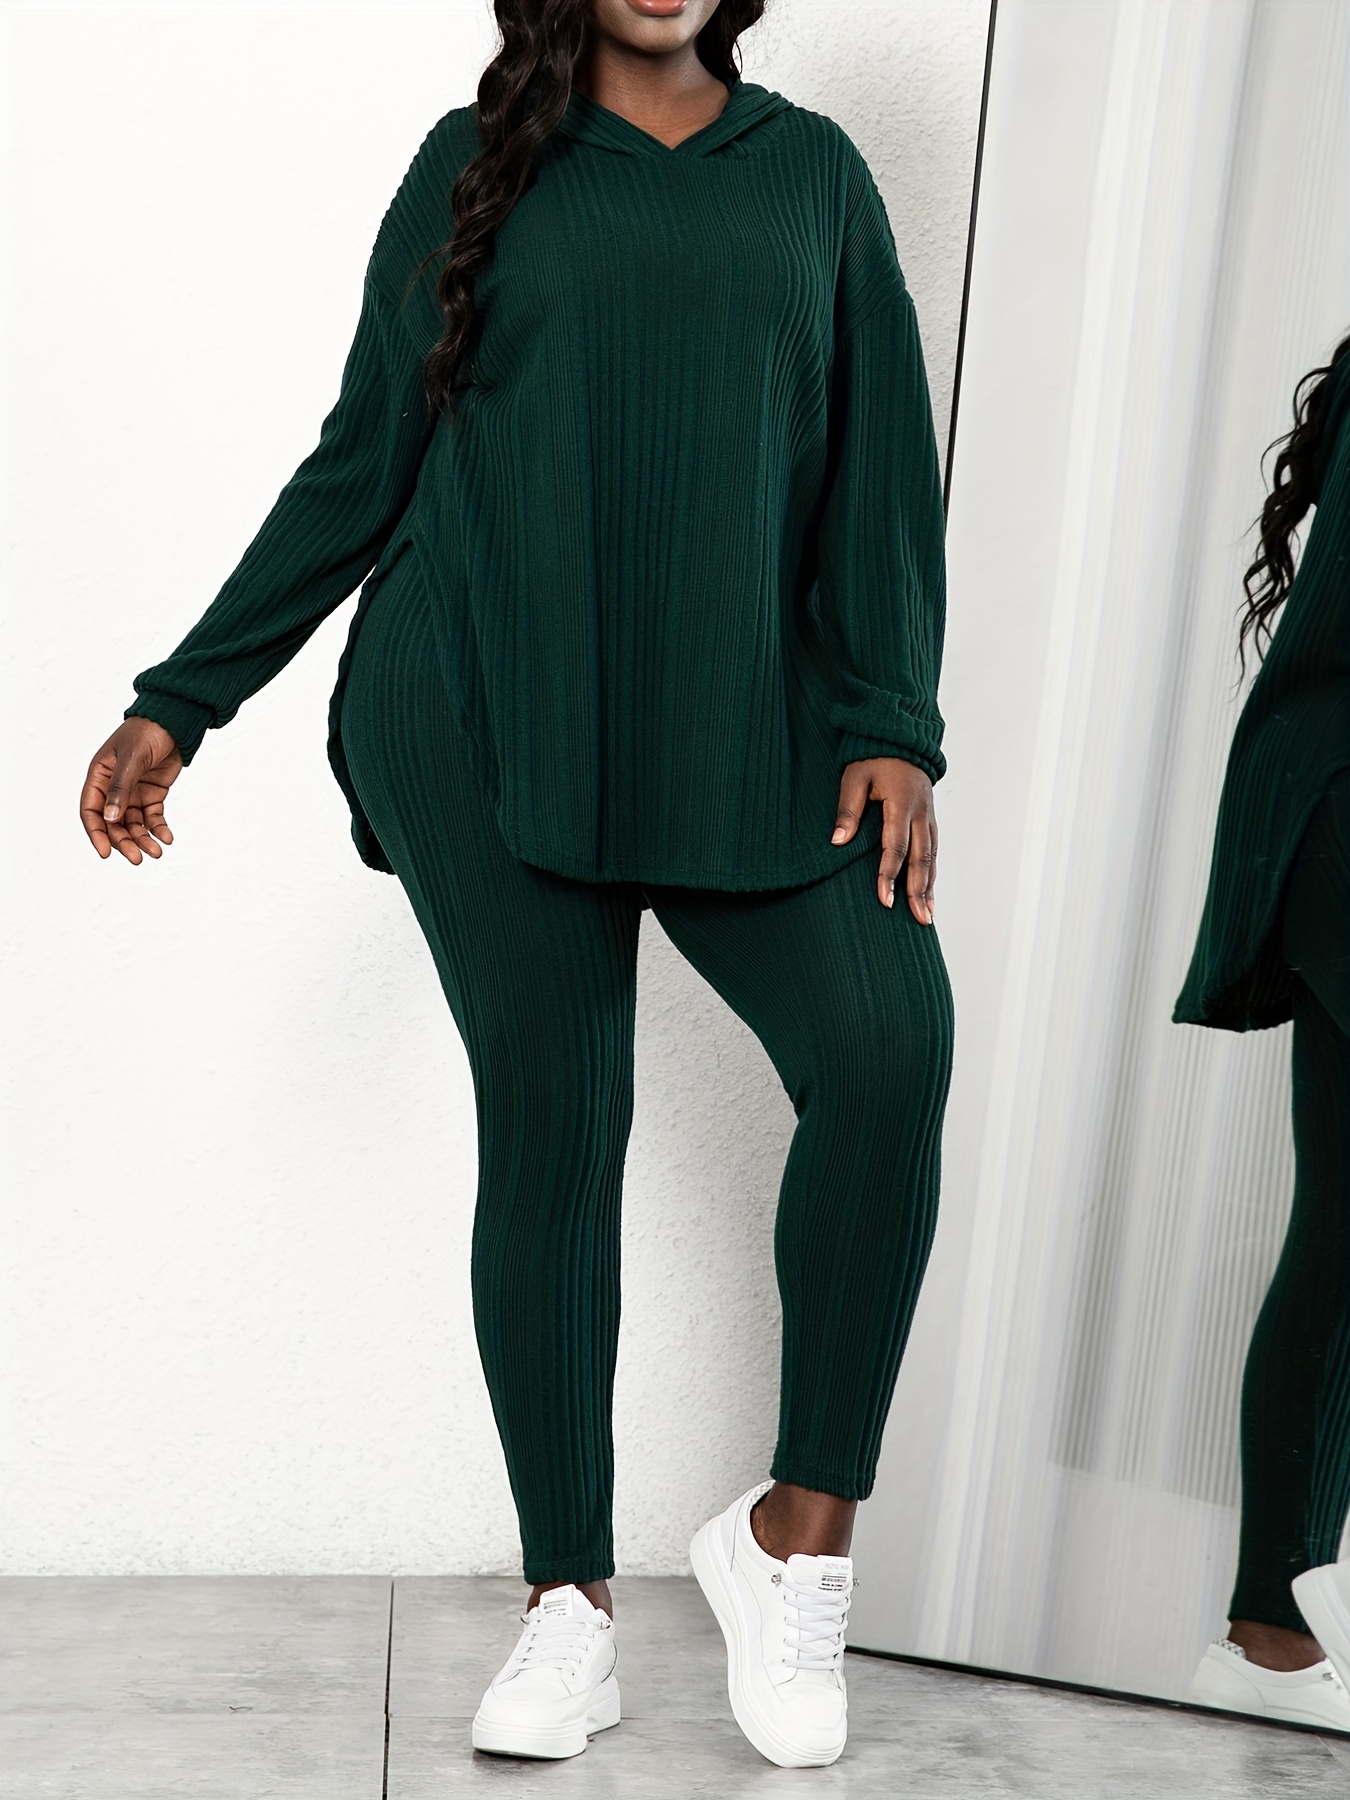 Dropship Plus Size Rib Knit Solid Long Sleeve Hoodie Tops & Leggings Set; Women's  Plus High Stretch Casual 2pcs Set Co-ords to Sell Online at a Lower Price